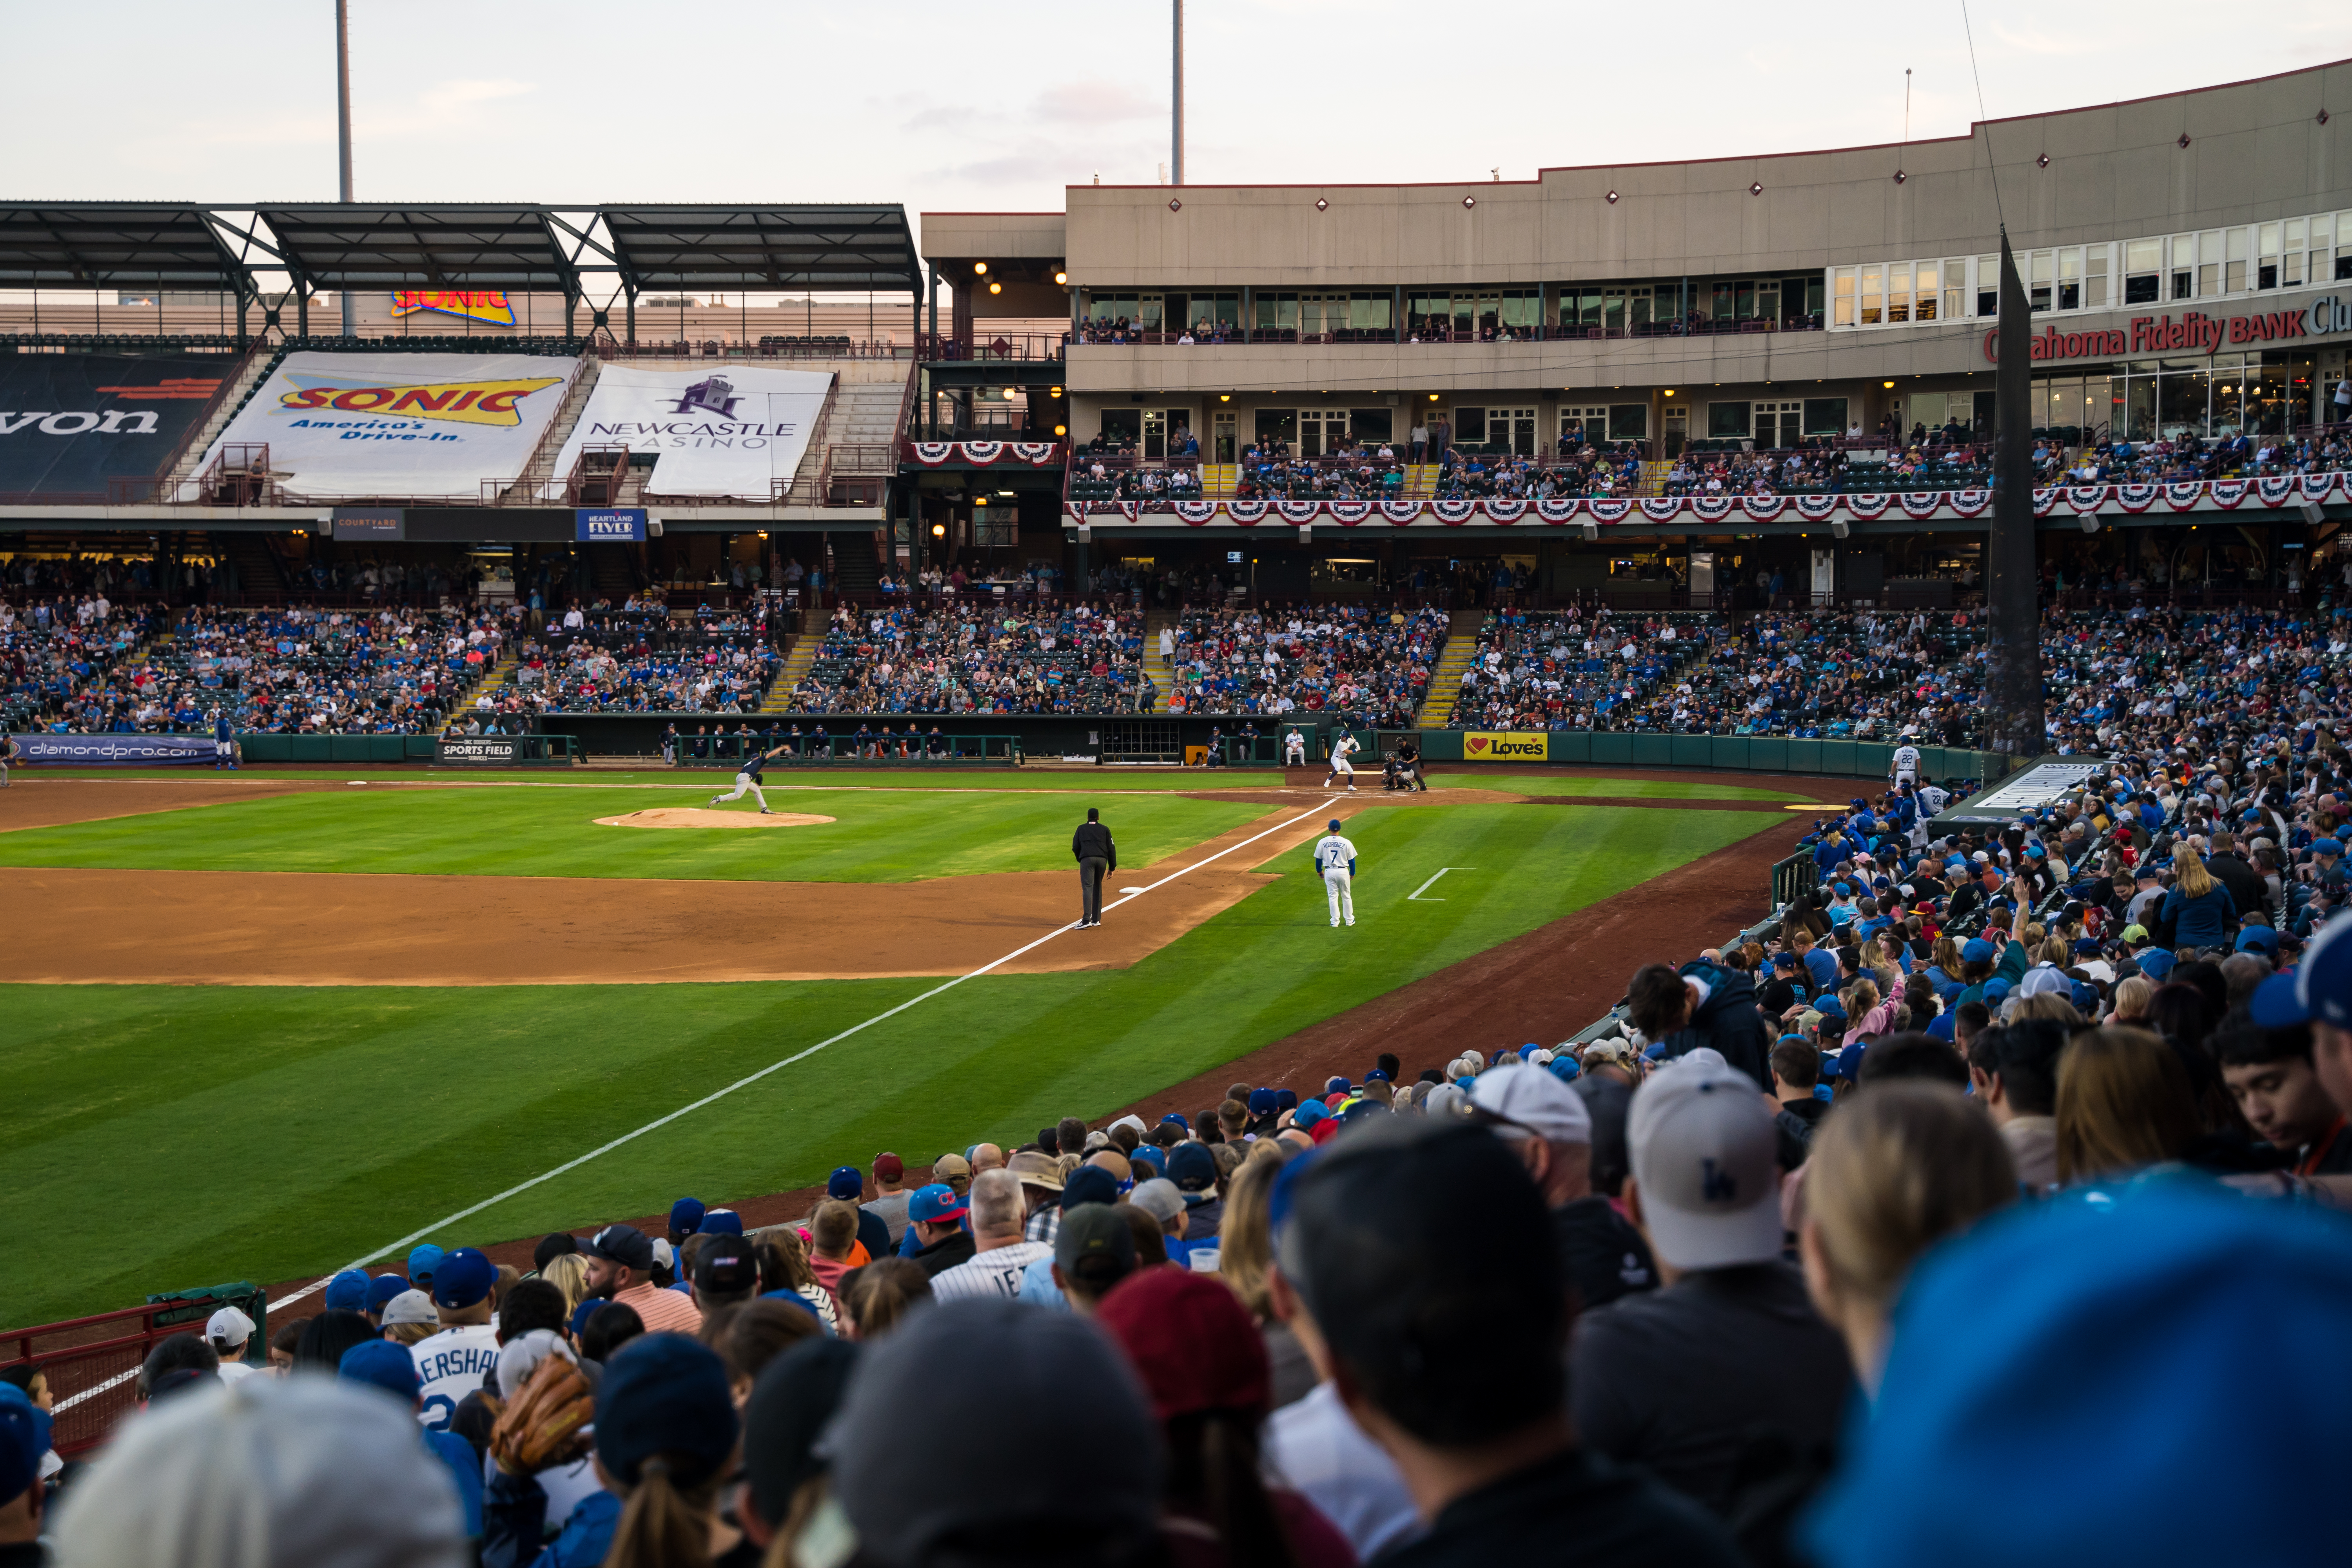 Oklahoma City Dodgers on X: Wear the same gear as your favorite players!  From jerseys to caps, you can find it all in the OKC Dodgers Online Team  Store. Shop today